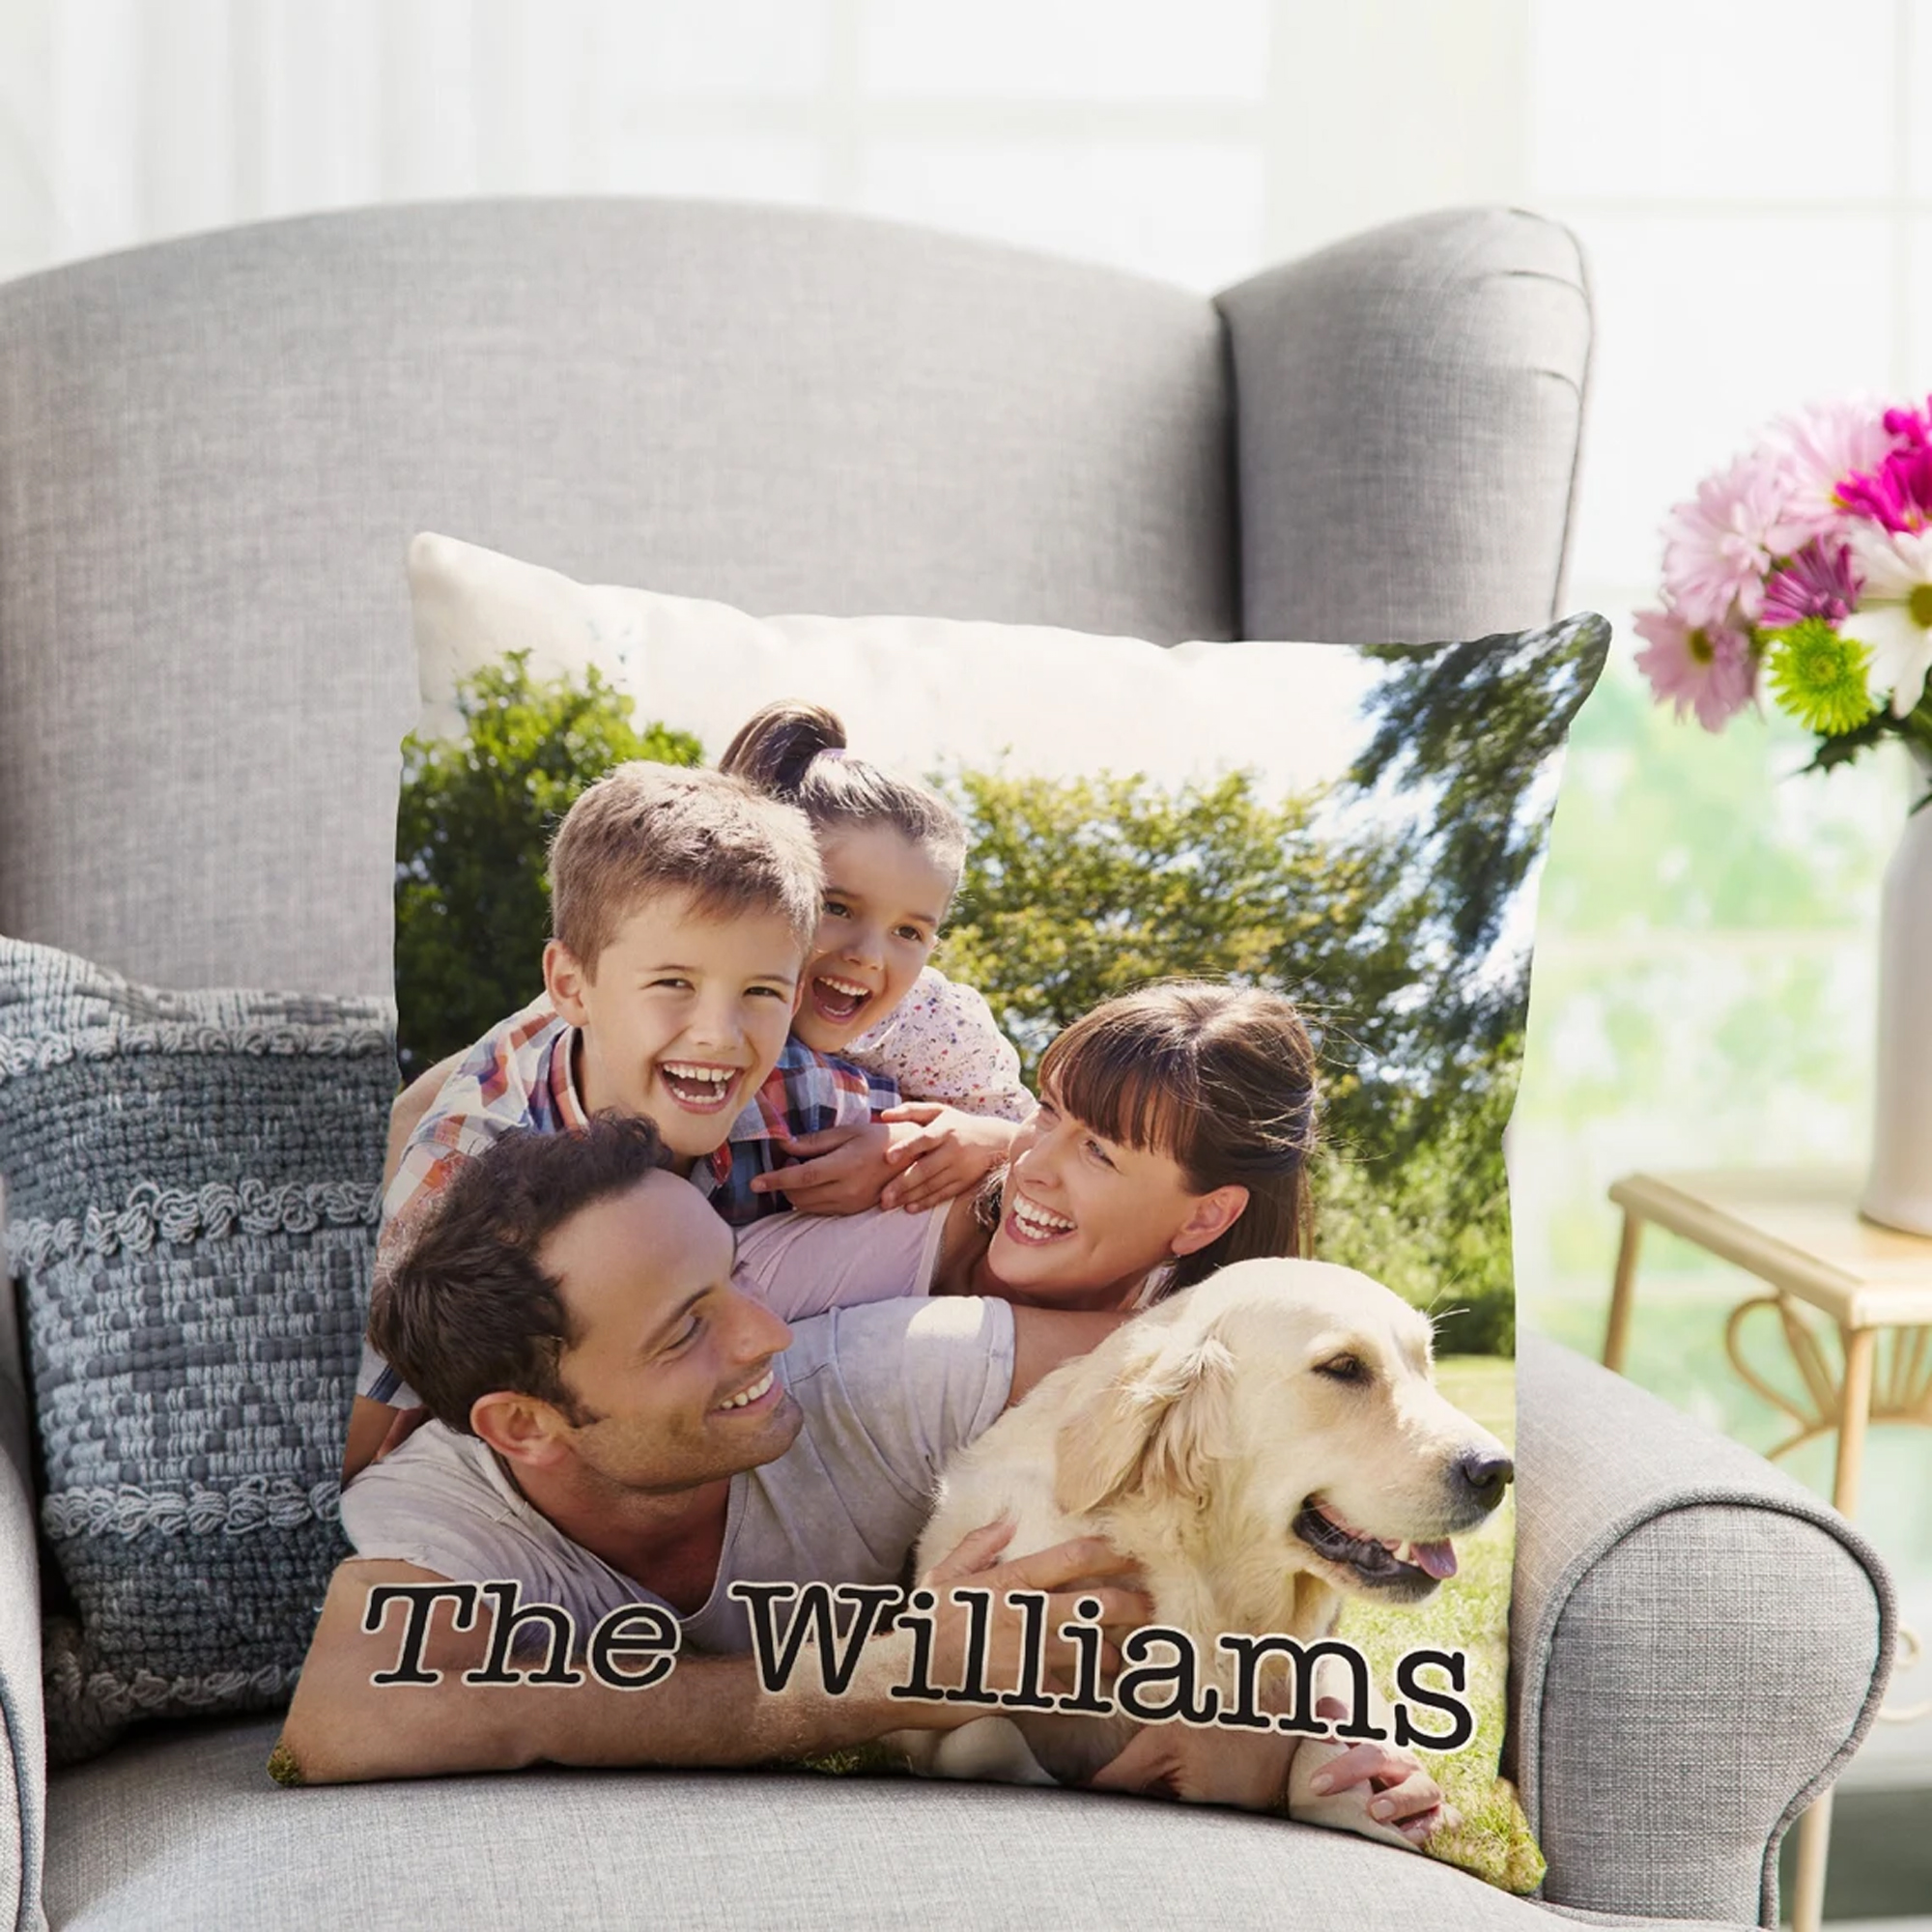 Custom Pillow With Photo Personalized Pillow Case Photo Pillowcase Fathers Day Gift Gift For Dad Him Housewarming Gift Throw Pillowcase